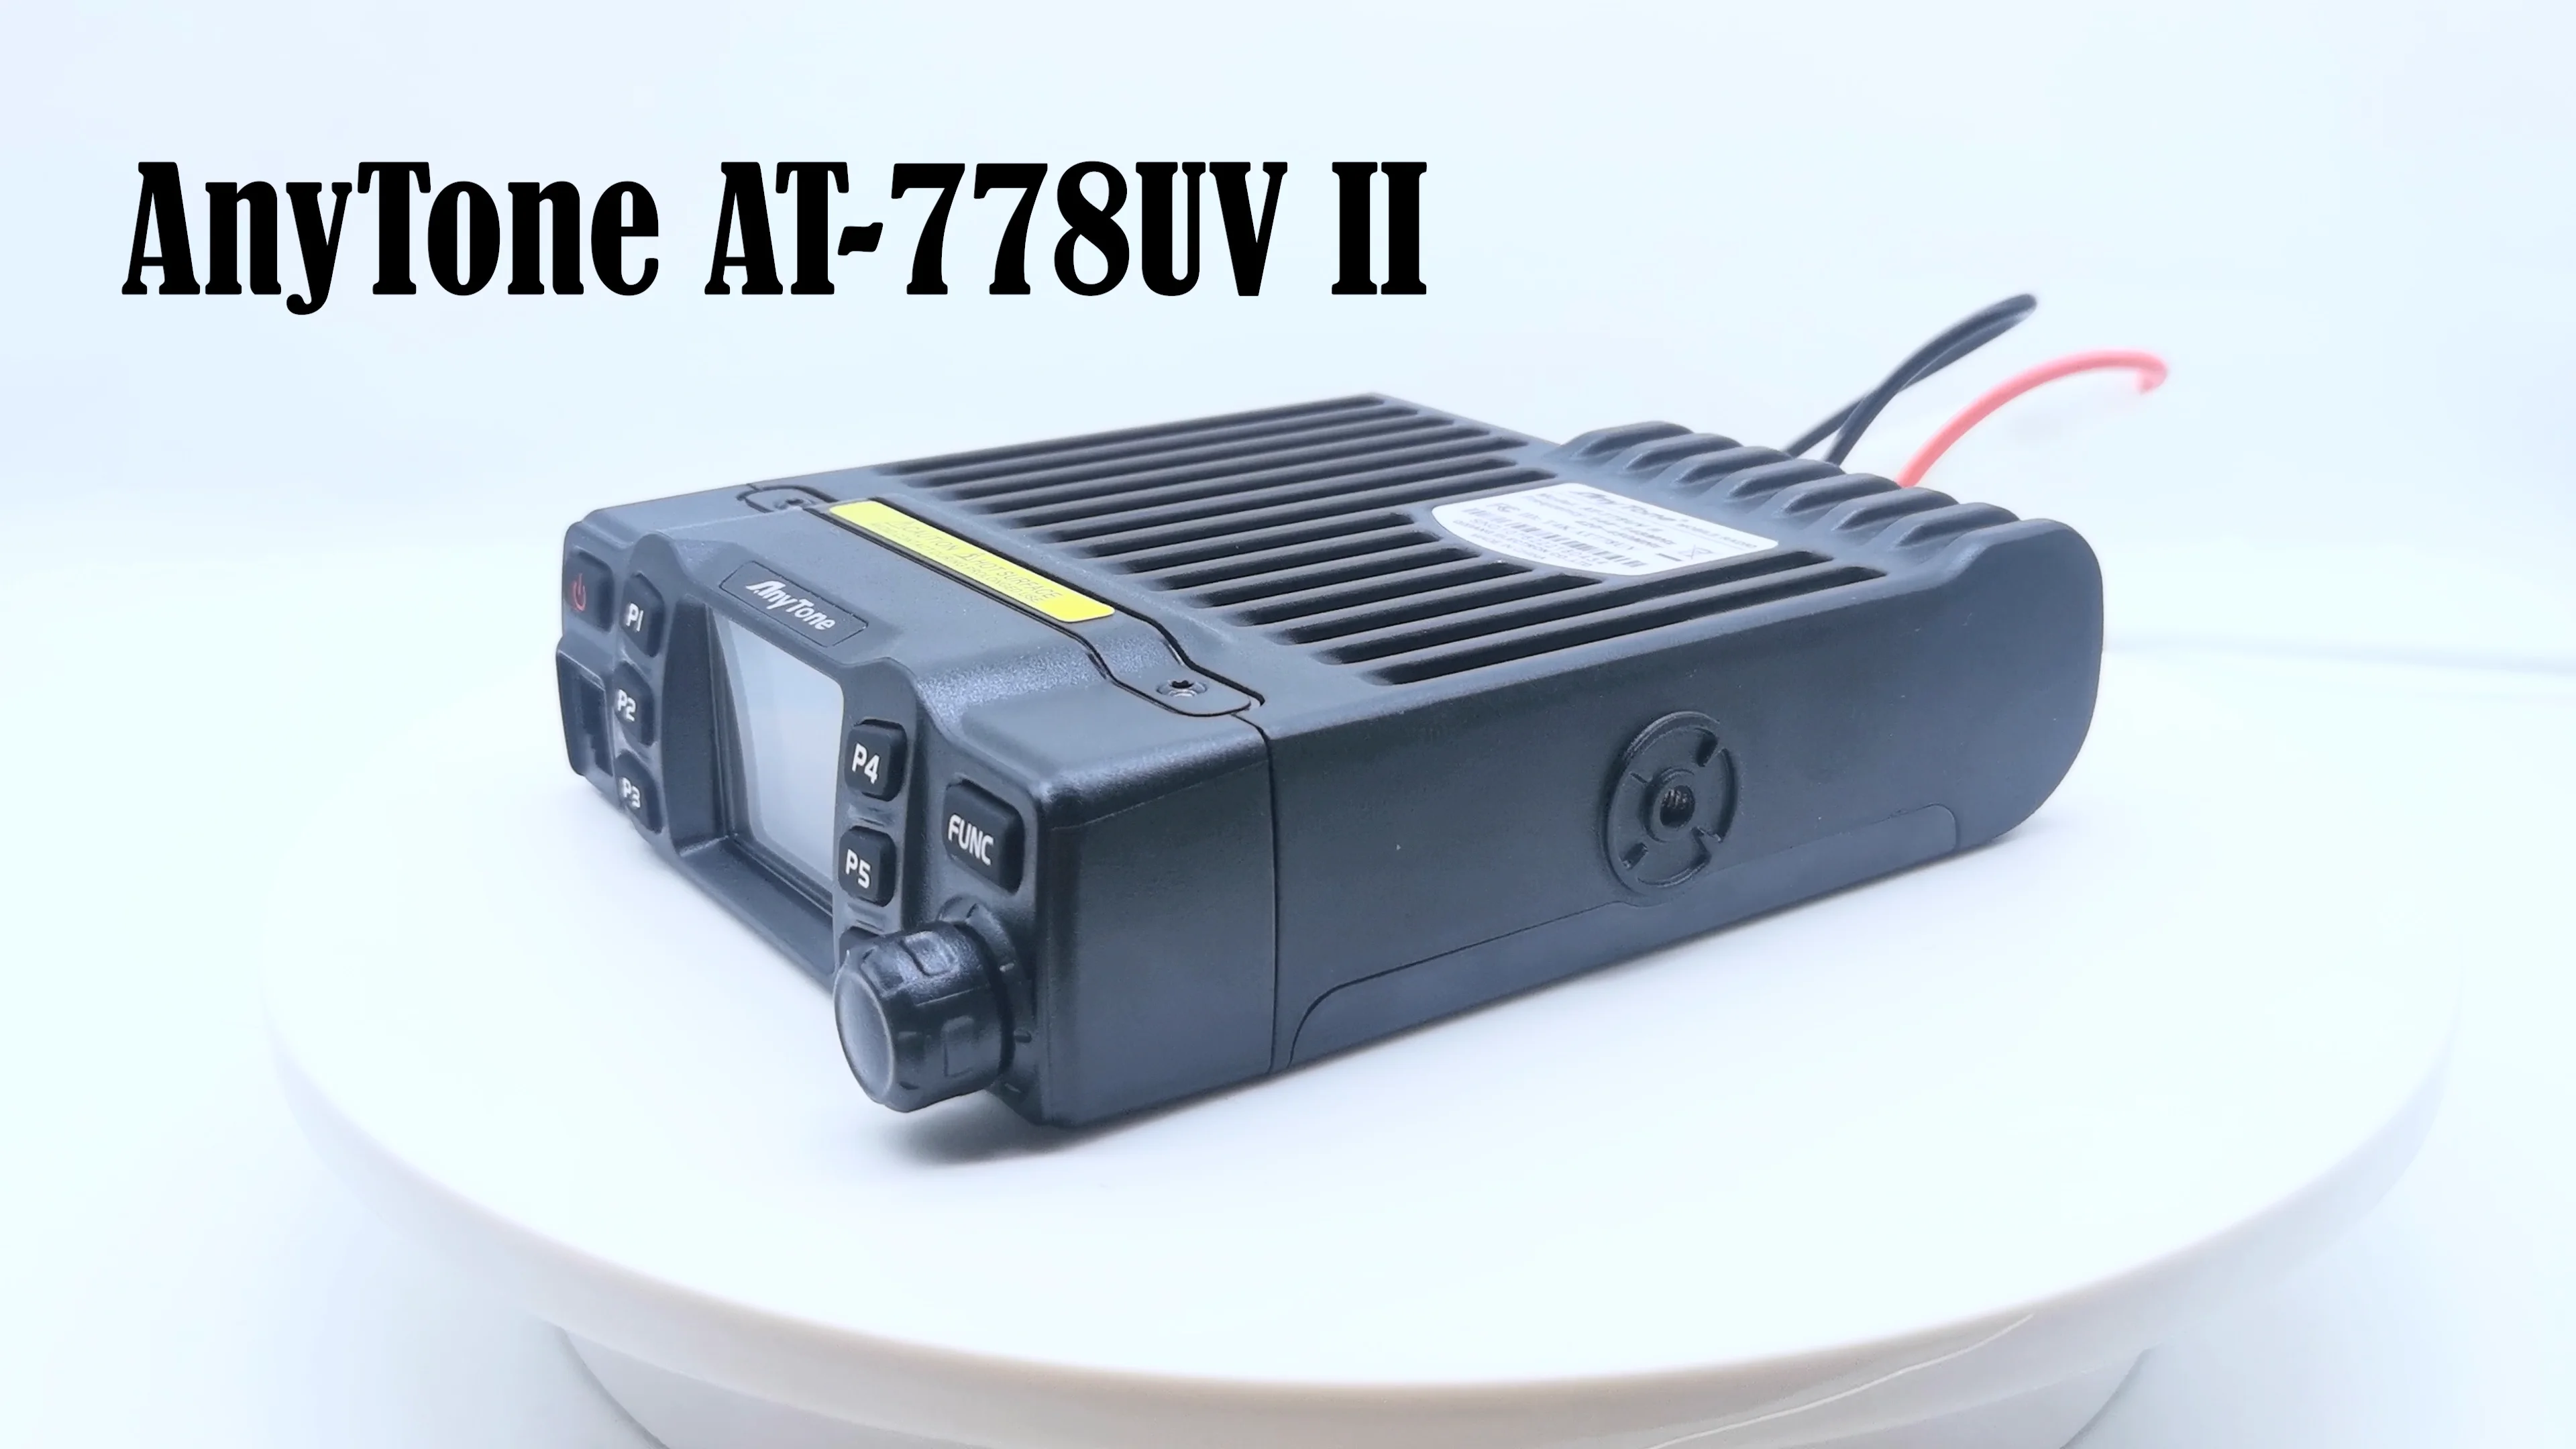 Source AT-778UV II AnyTone VHF 136-174MHz UHF 400-480MHz 25W Dual Band  Mobile Transceiver on